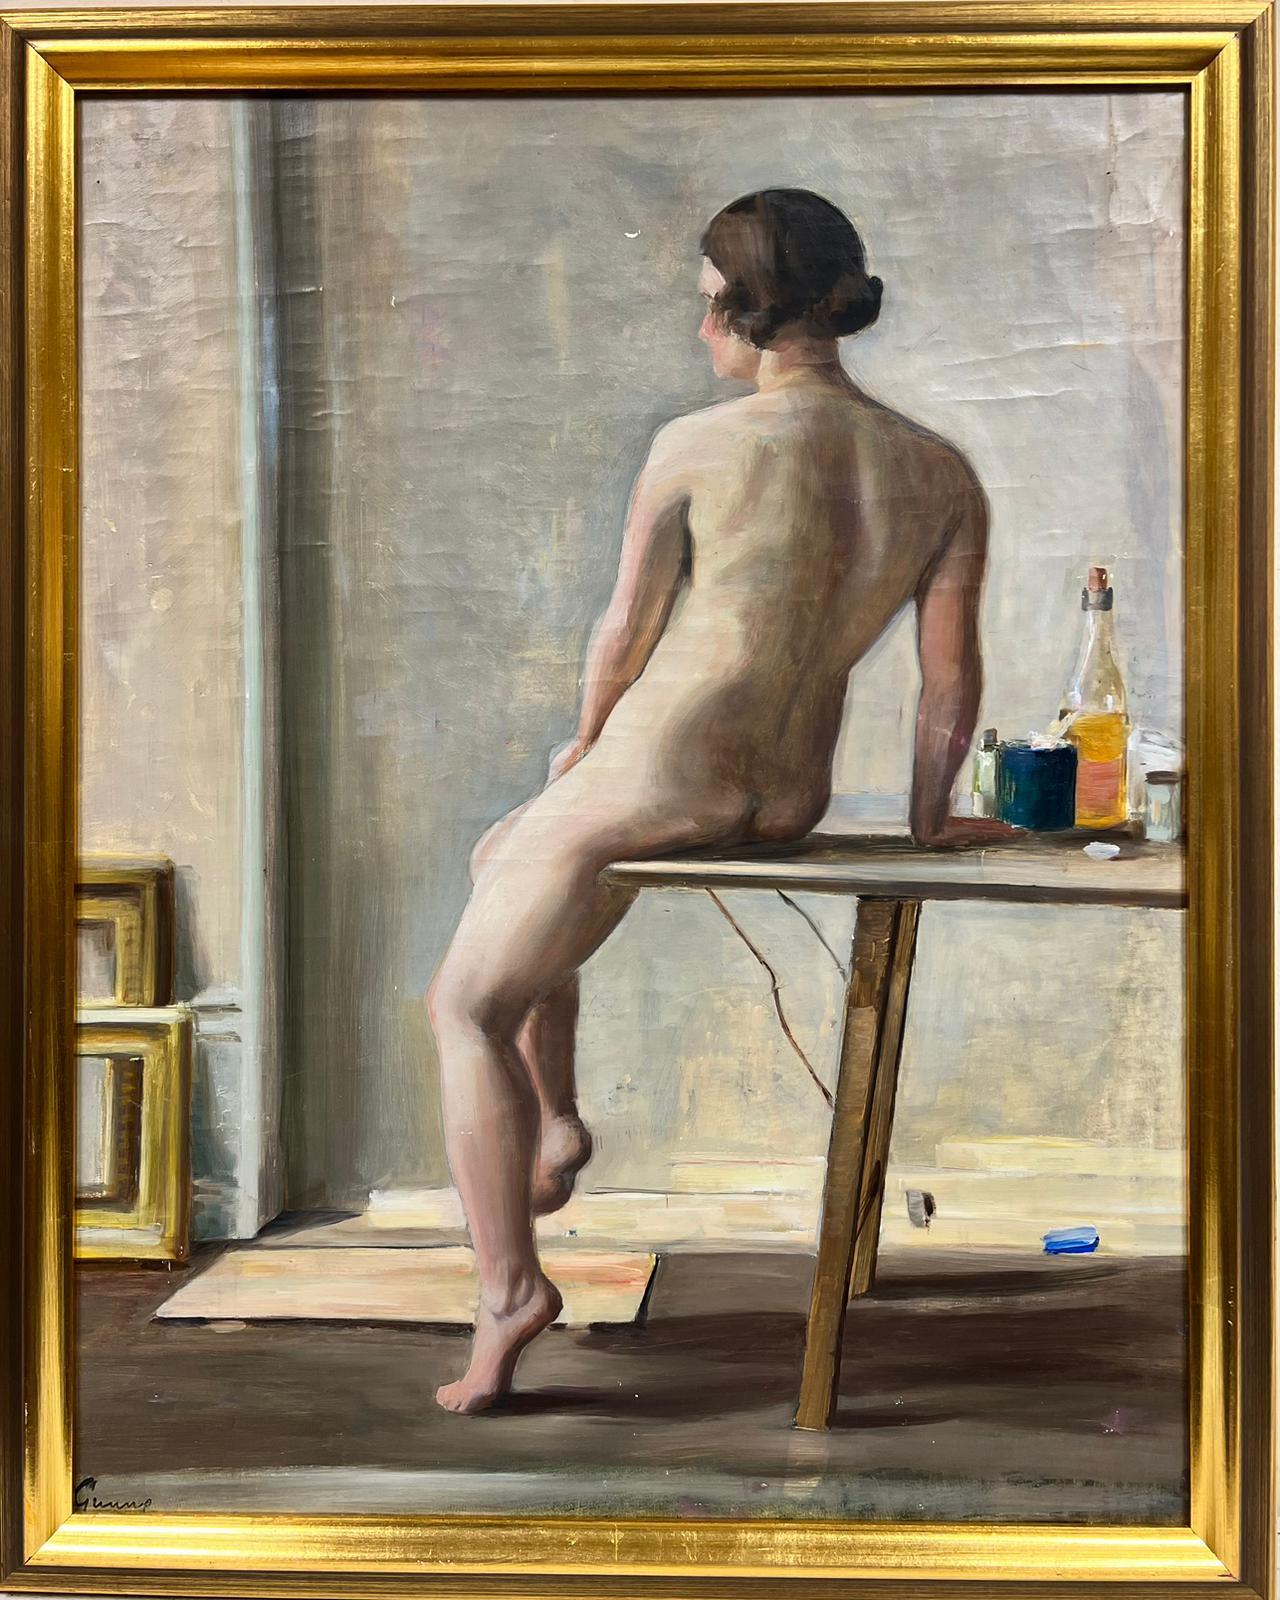 Nude Lady in Interior Artists Model Mid Century Swedish Oil on Canvas framed - Painting by Carl Gunne